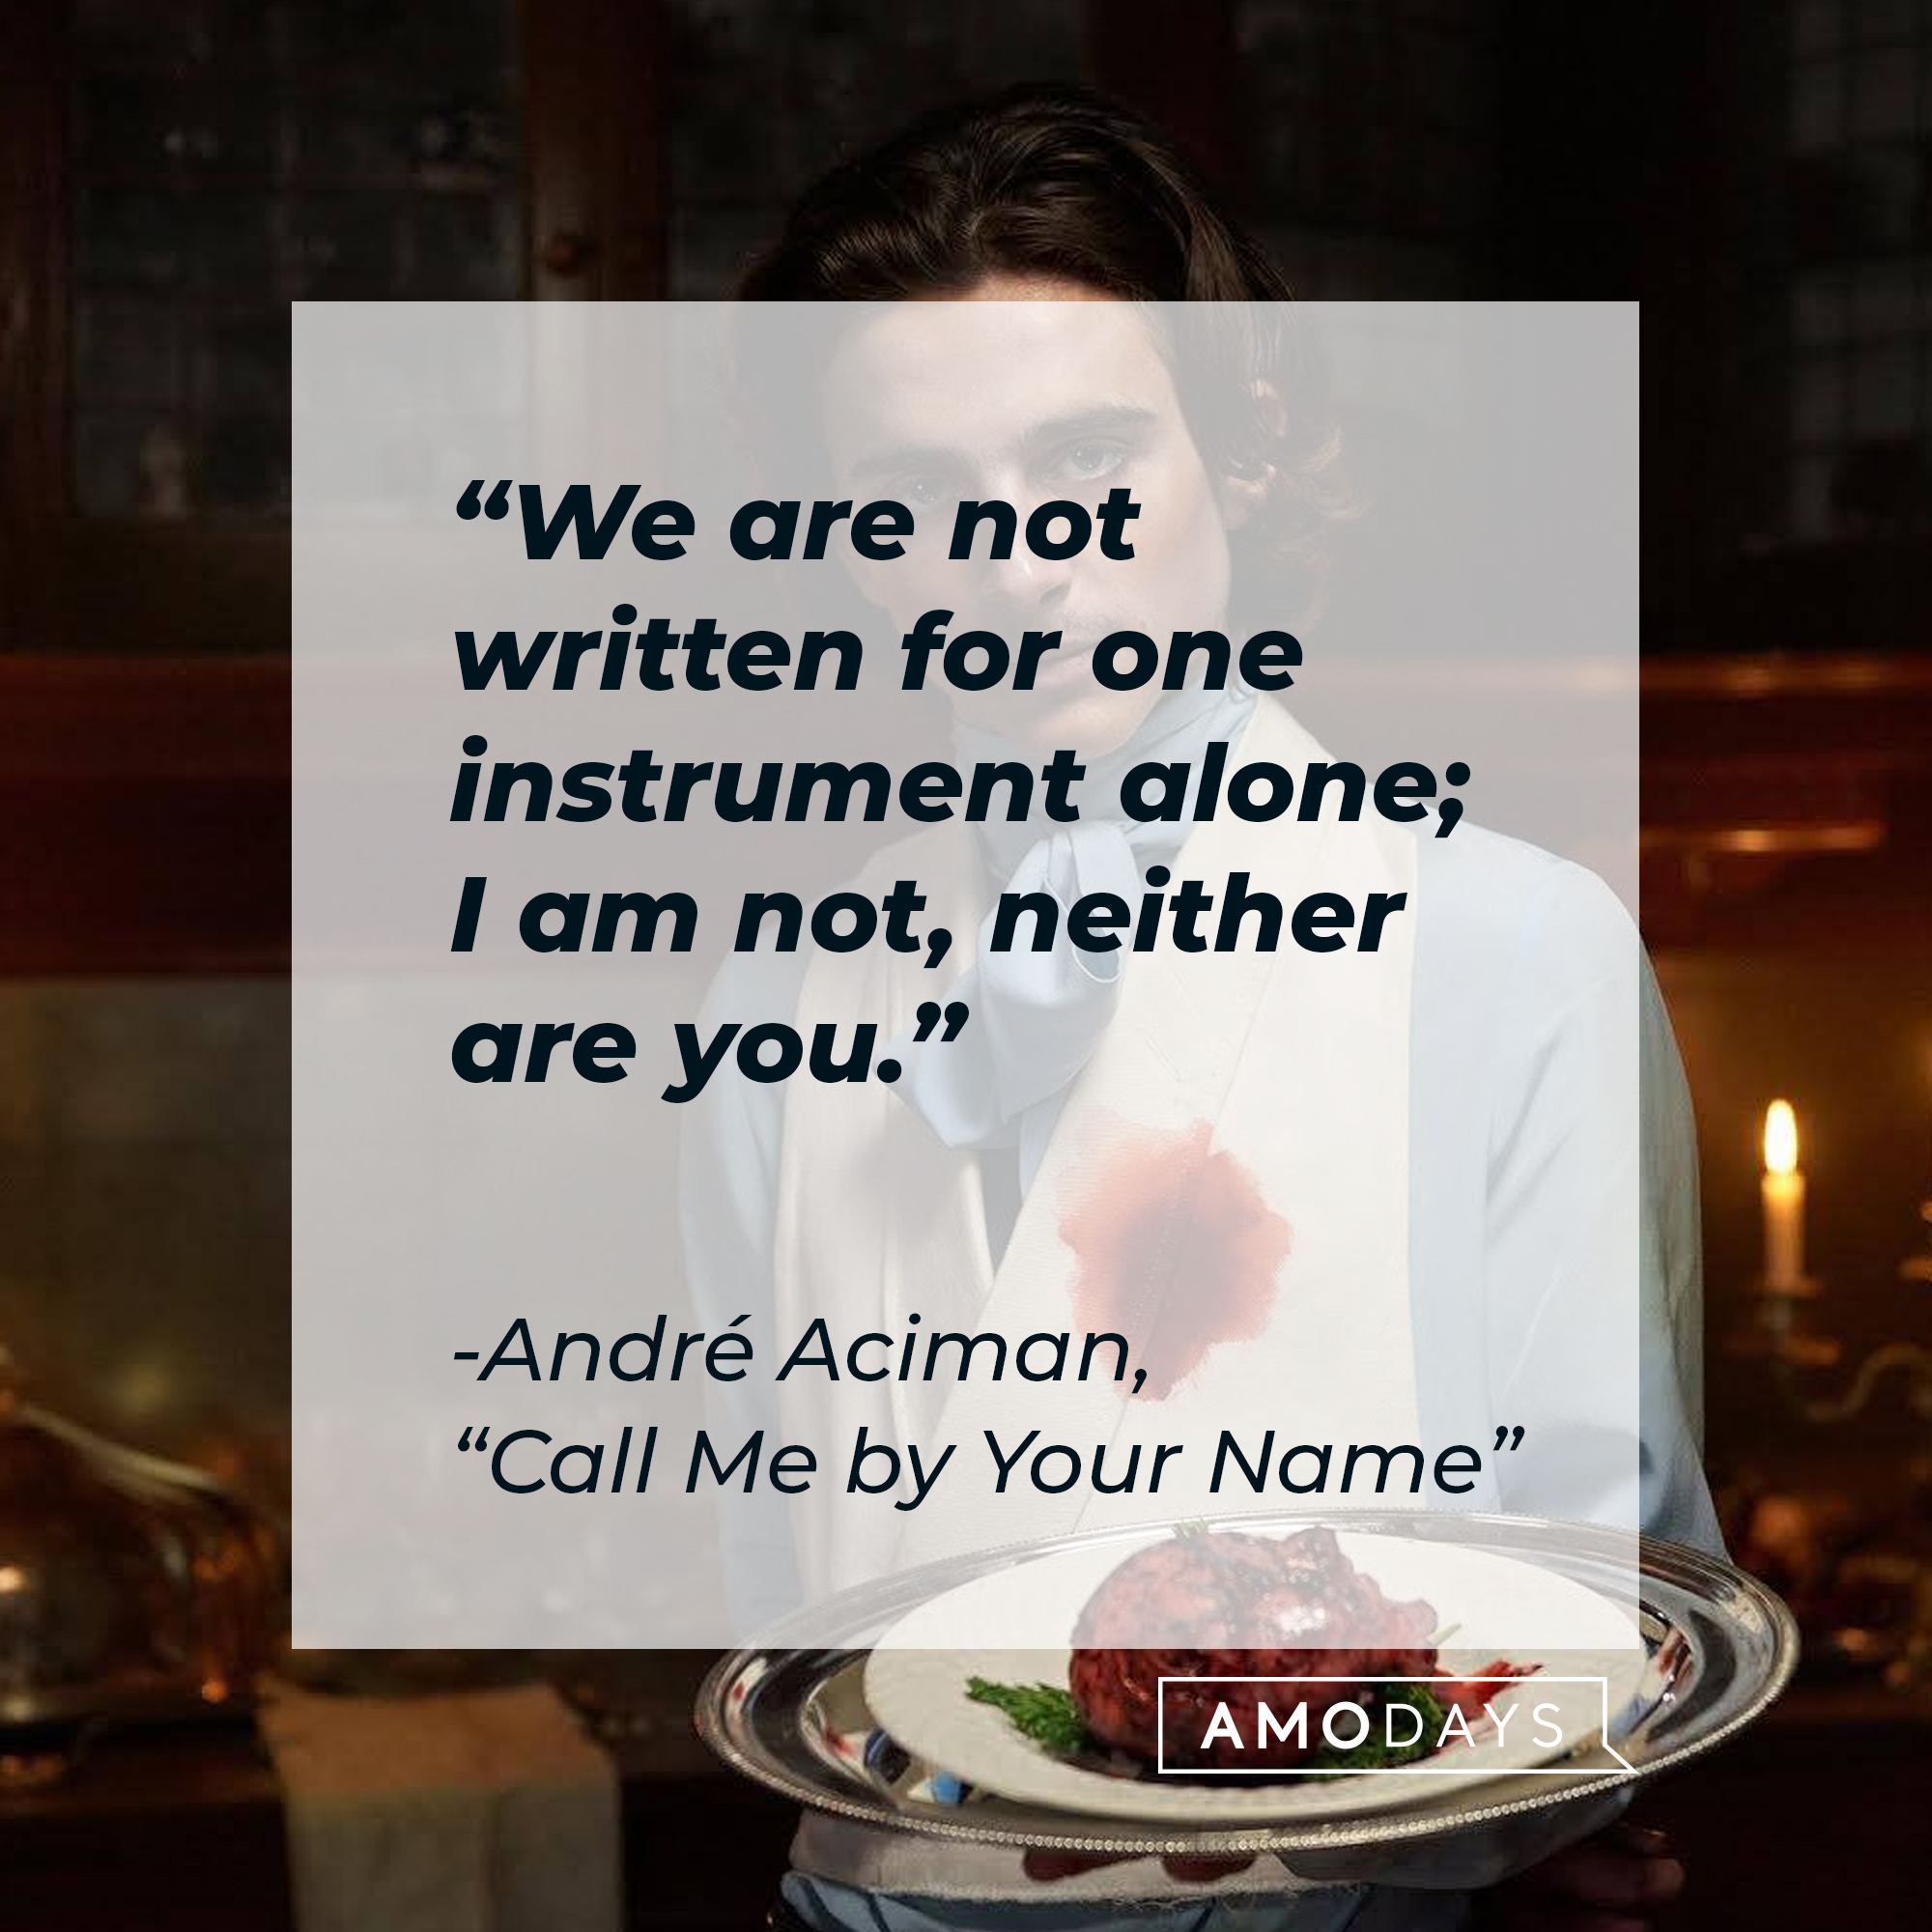 The character Elio from the film “Call Me By Your Name,” with a quote by the author, André Aciman, from the book it’s based on: “We are not written for one instrument alone; I am not, neither are you.” | Source: Facebook.com/CallMeByYourNameFilm